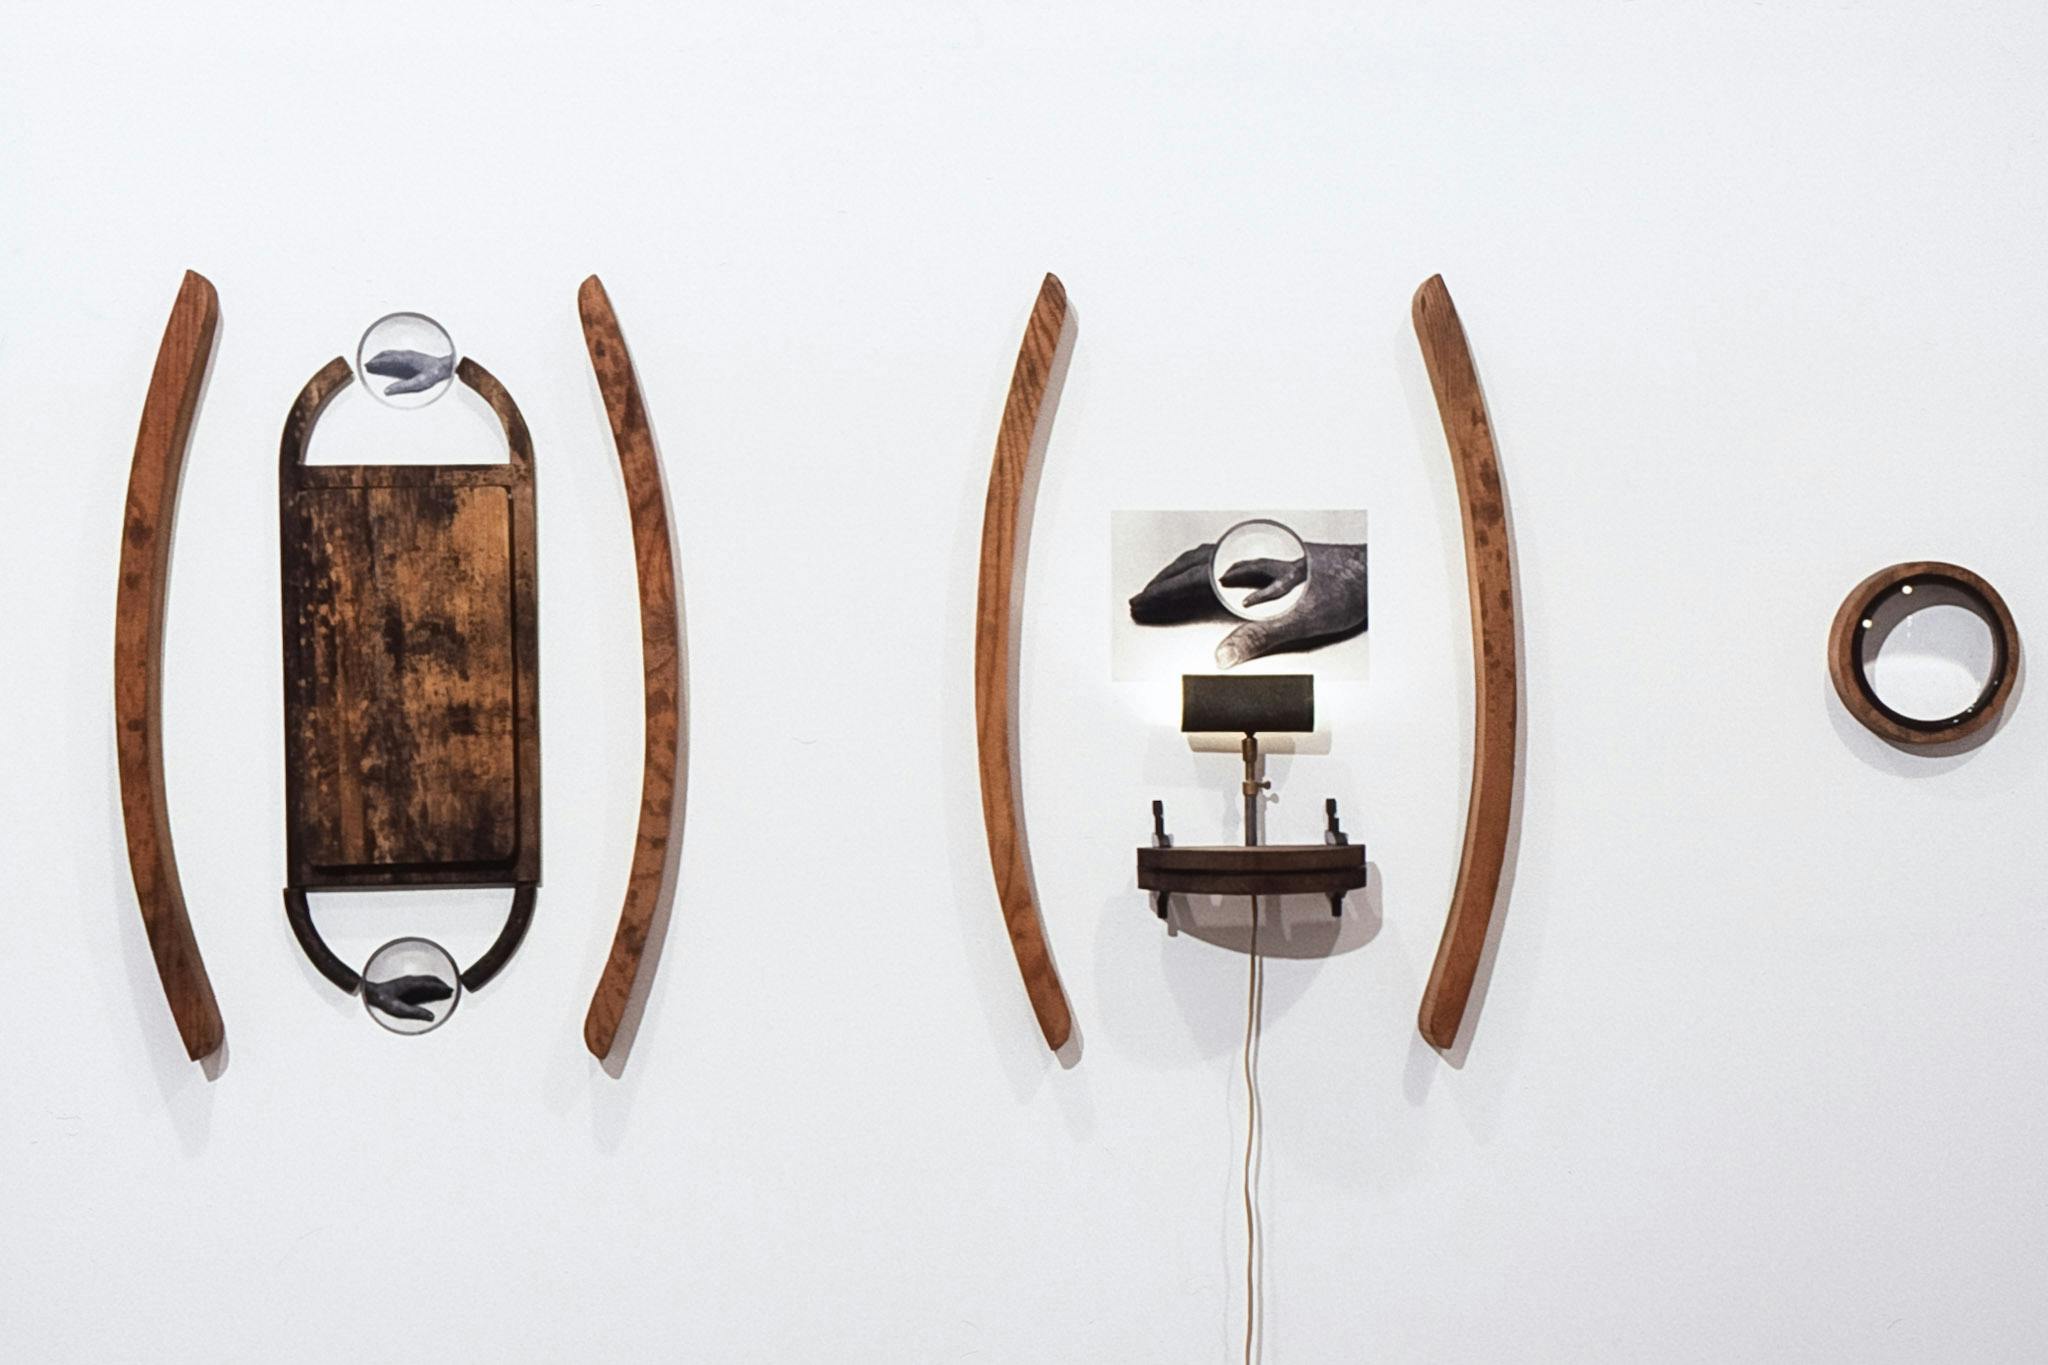 Three pieces of sculptures are mounted on the wall. Wooden pieces including a cutting board, monocular lenses, and the identical image of a hand are repeated throughout the composition.